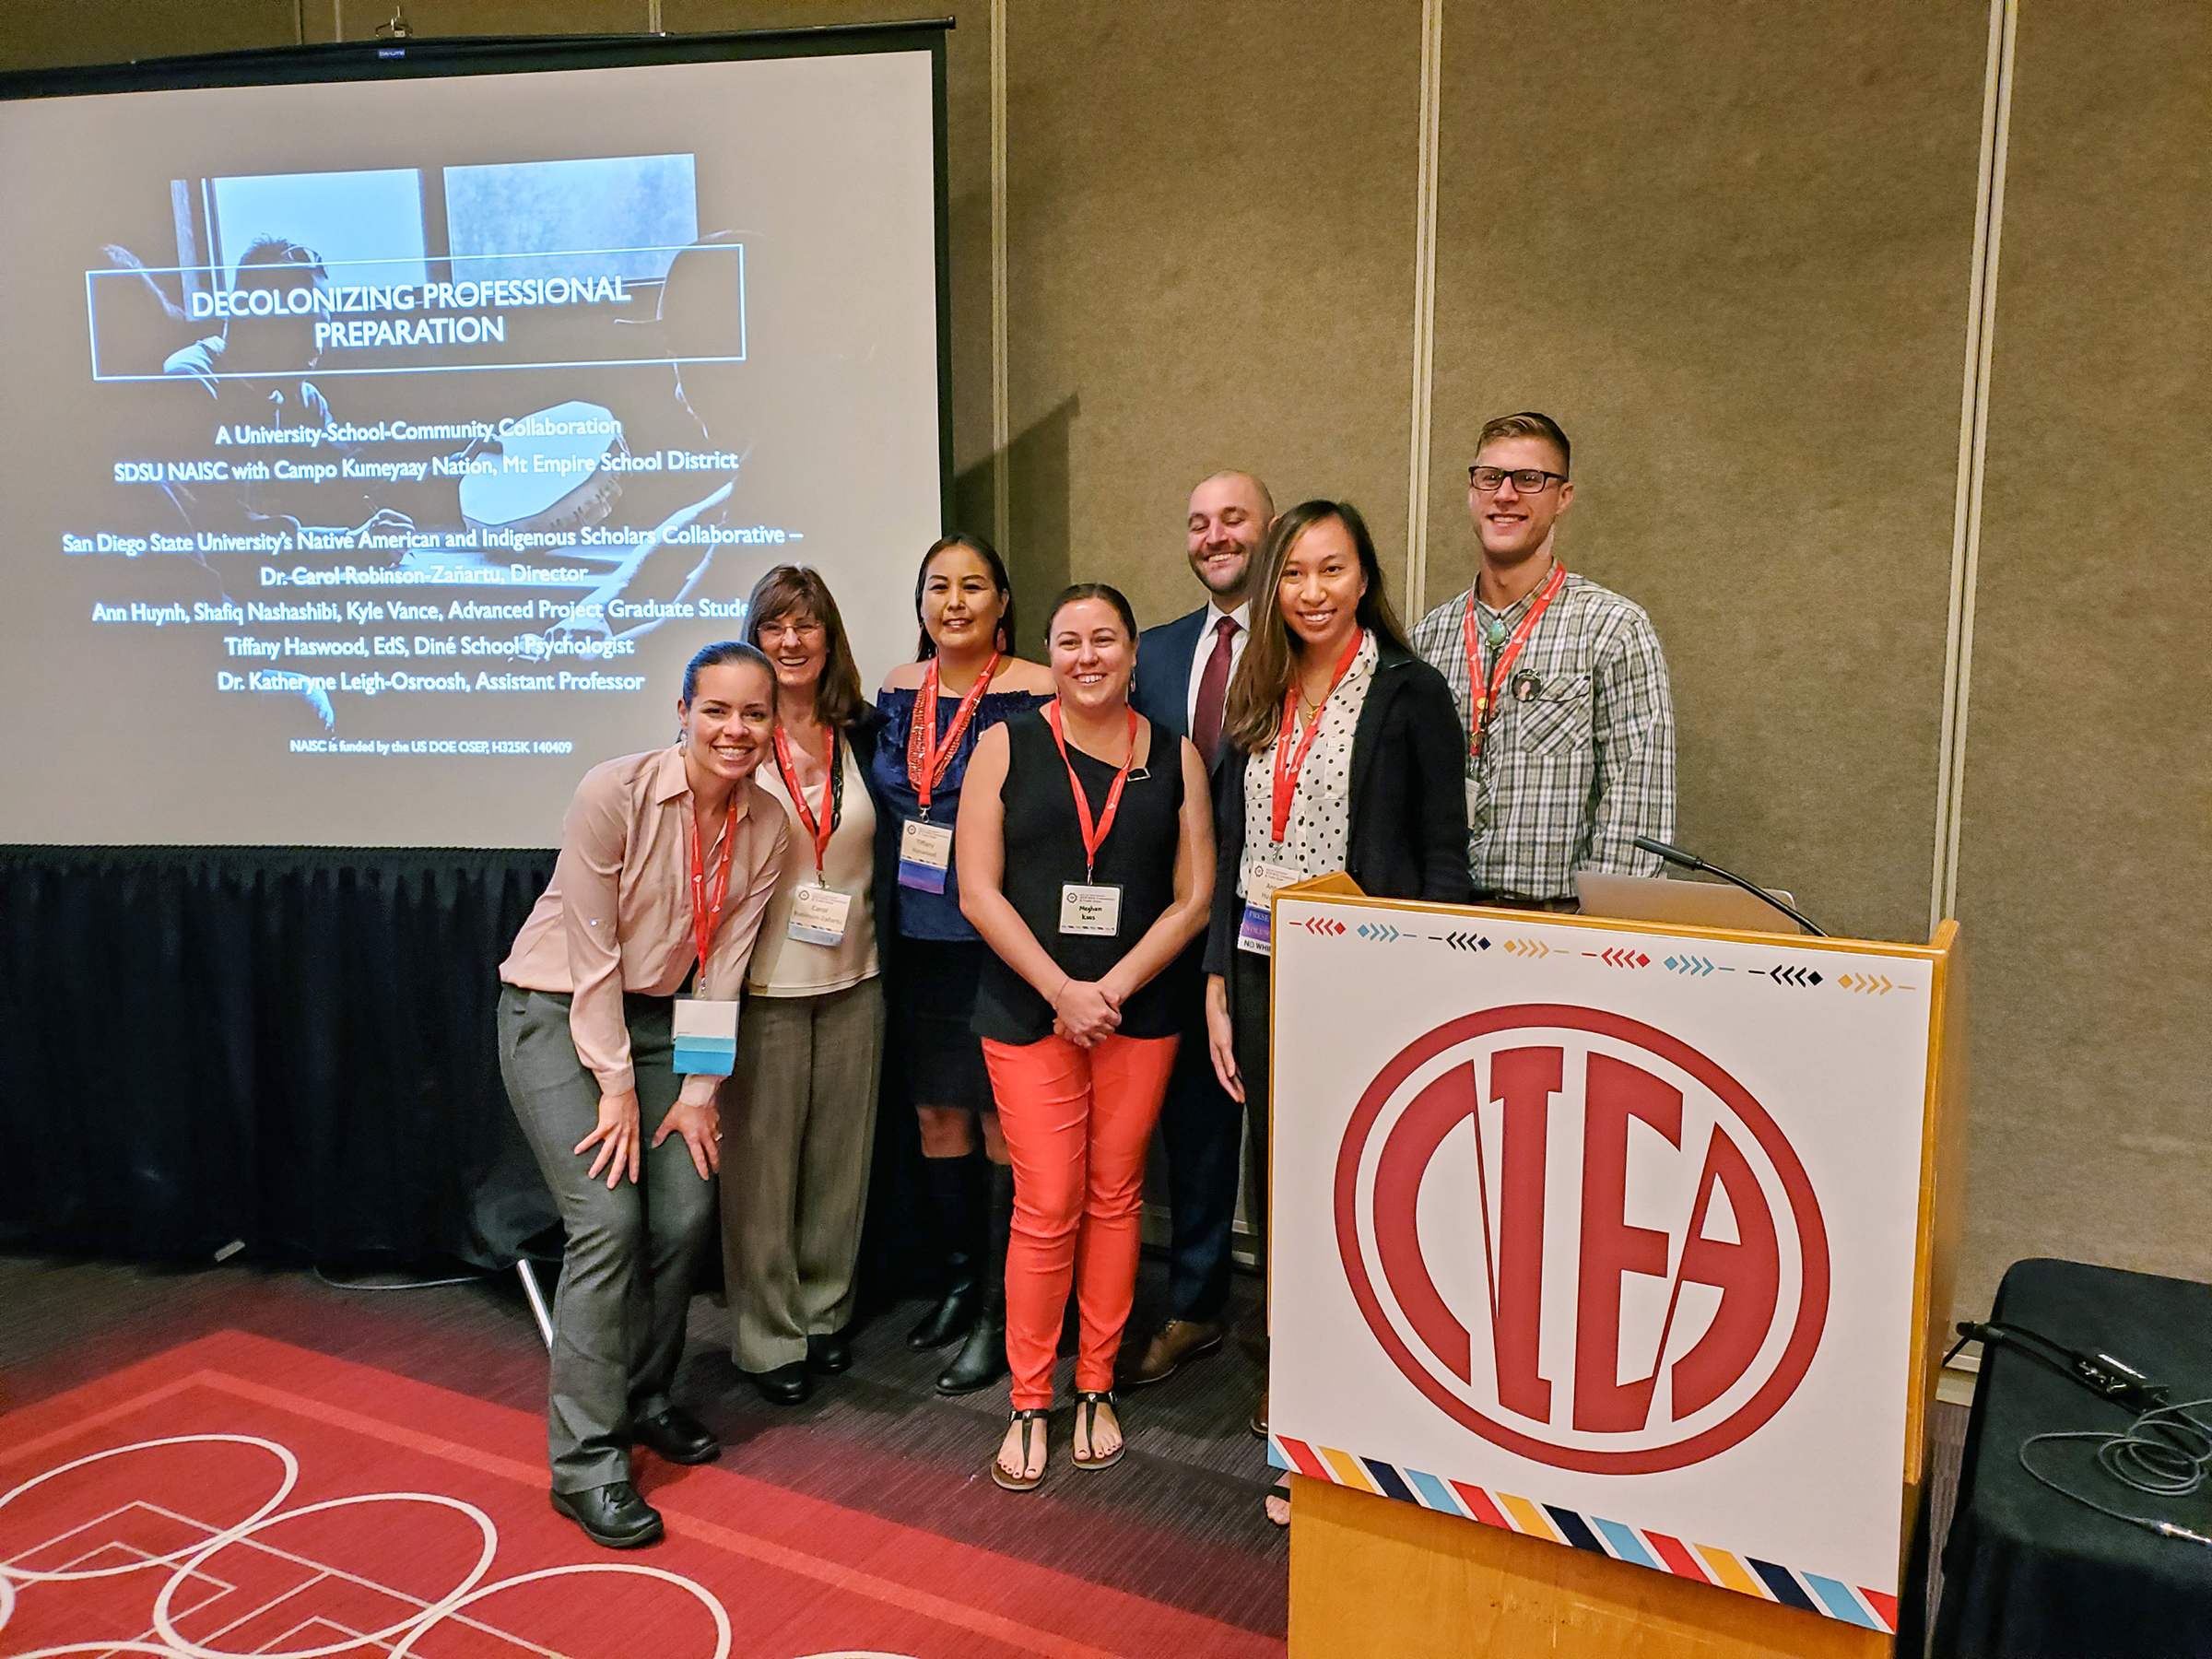 SHPA scholars present their work at the NIEA convention.